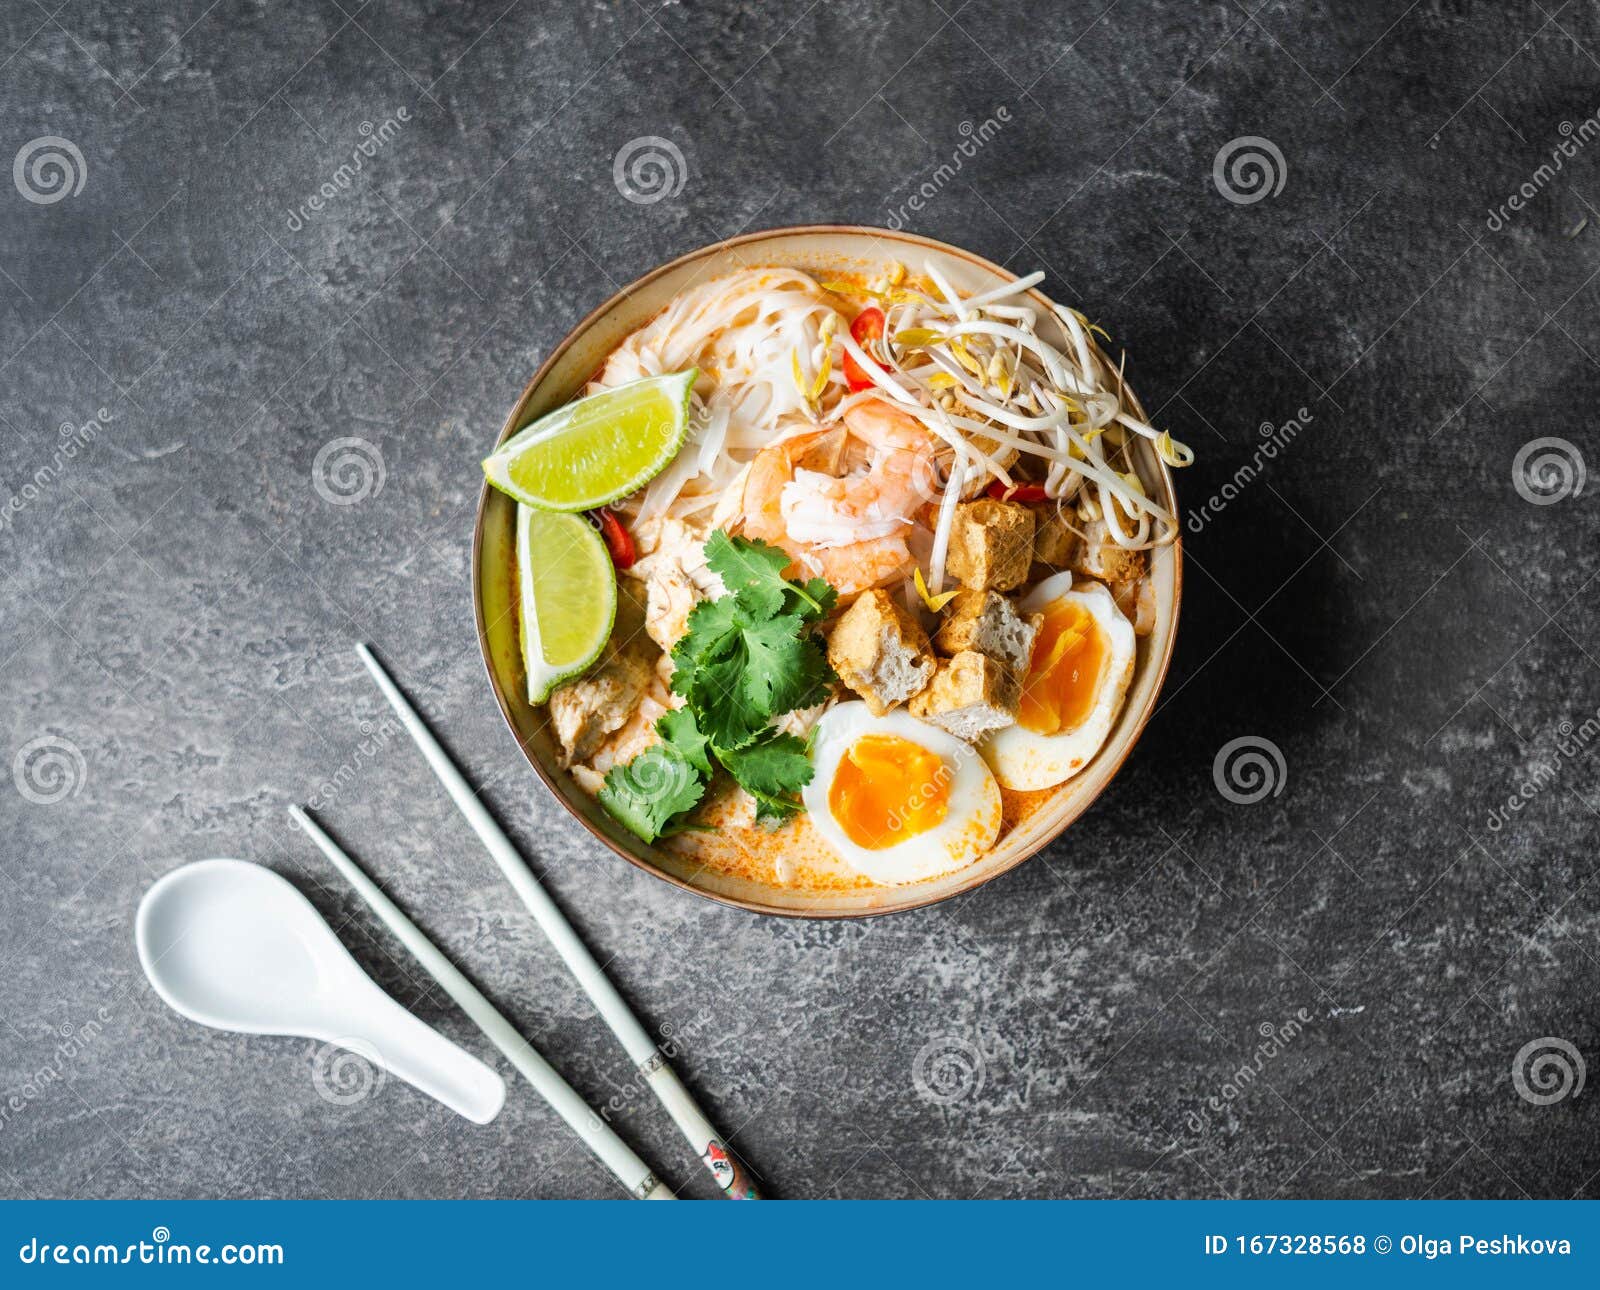 Malaysian Noodles Laksa Soup with Chicken, Prawn and Tofu in a Bowl on ...